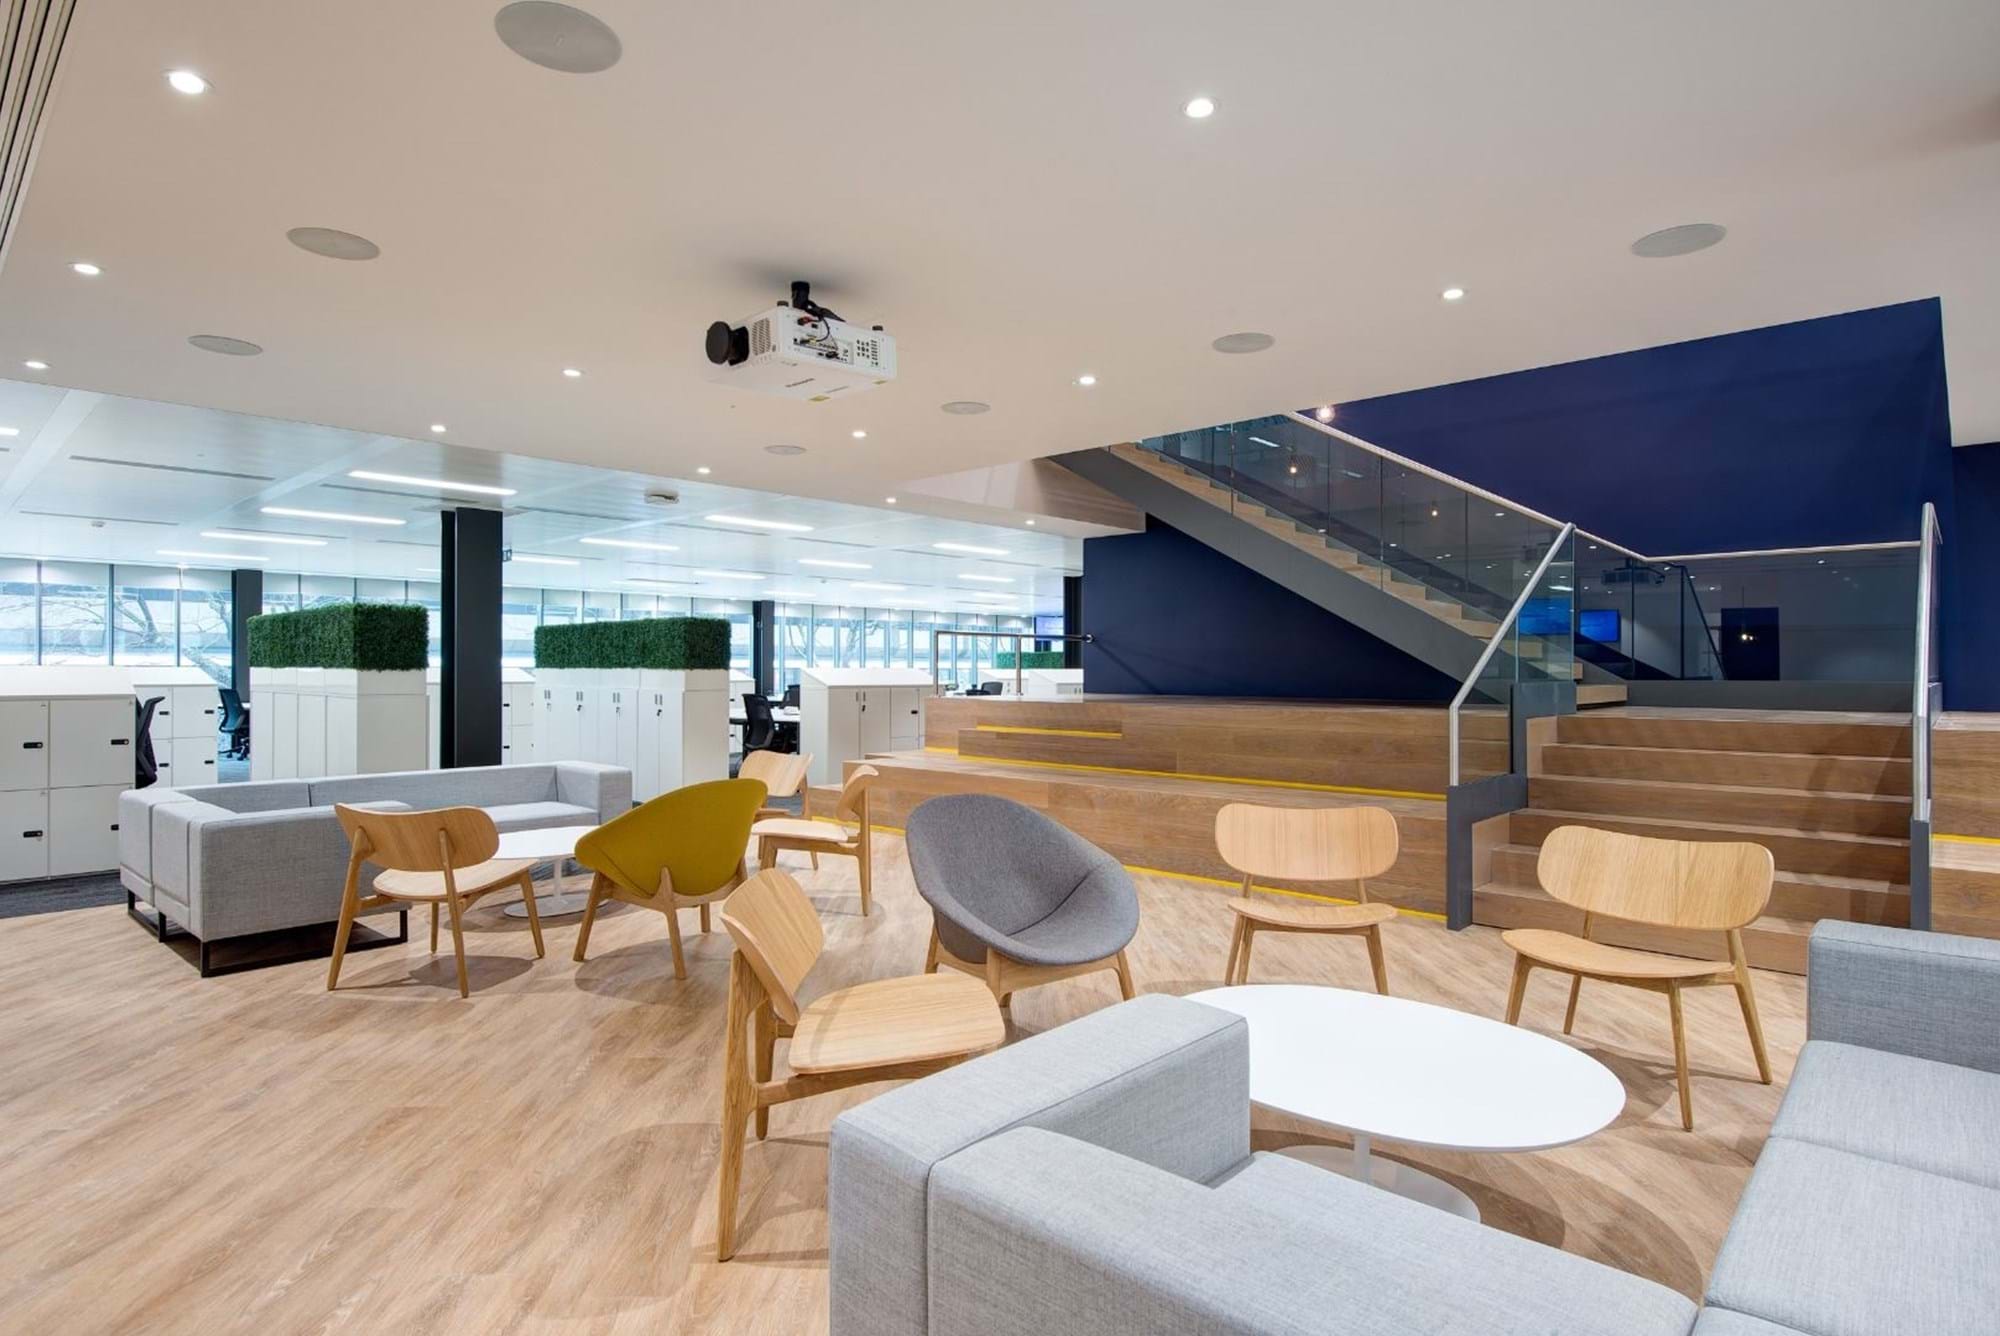 Modus Workspace office design, fit out and refurbishment - William Hill - William Hill 10 highres sRGB.jpg